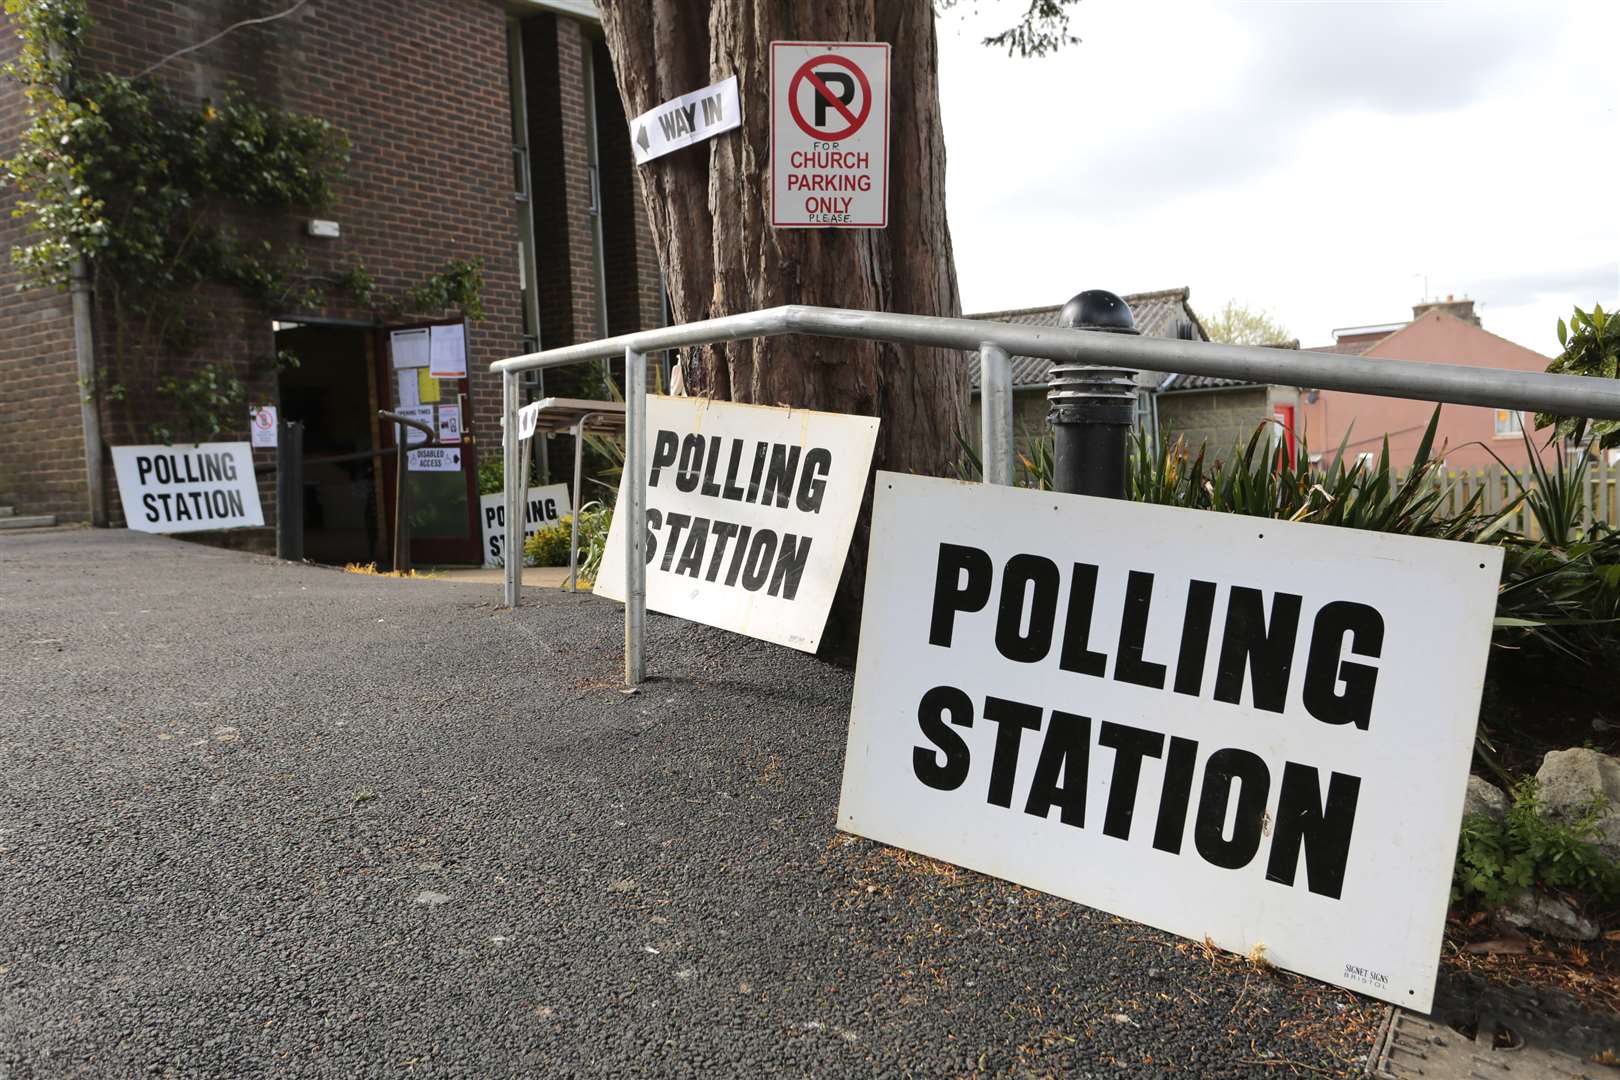 A polling station in Maidstone